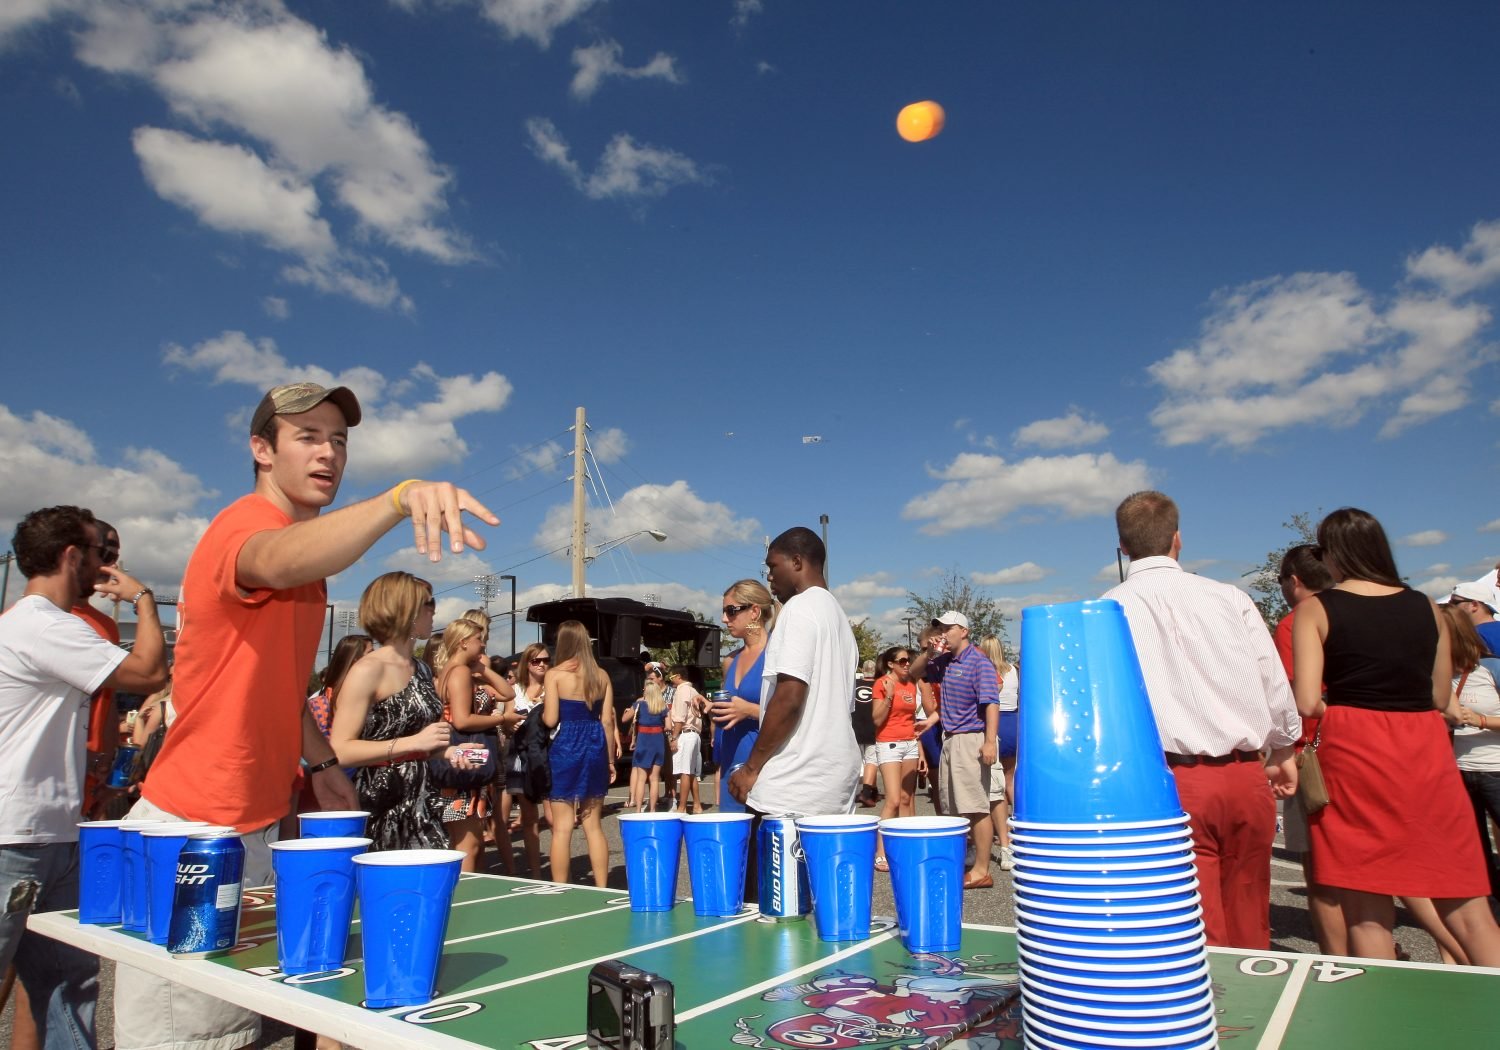 Tailgating Tips to Party Like a Professional